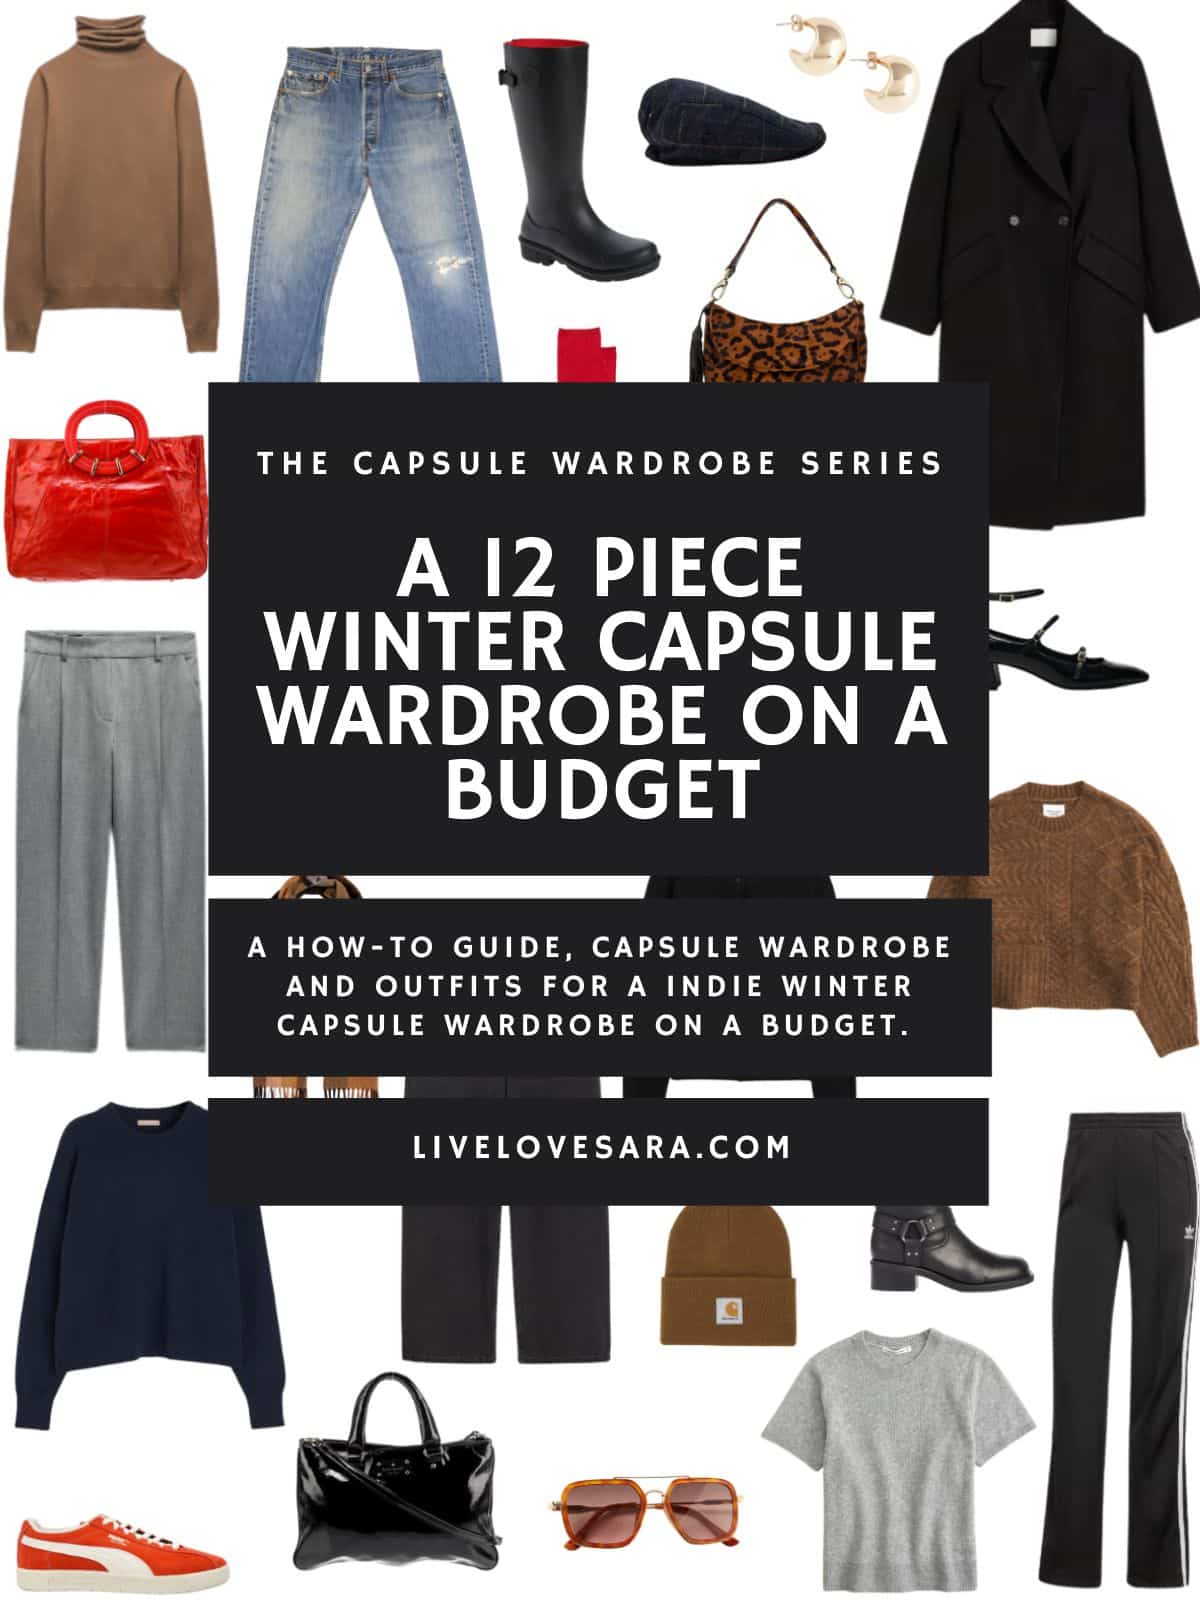 A white background with 12 clothing items plus shoes and accessories for a Winter capsule wardrobe on a budget. In the middle is a black box with white text that reads, "A 12 Piece Winter Capsule Wardrobe on a Budget."